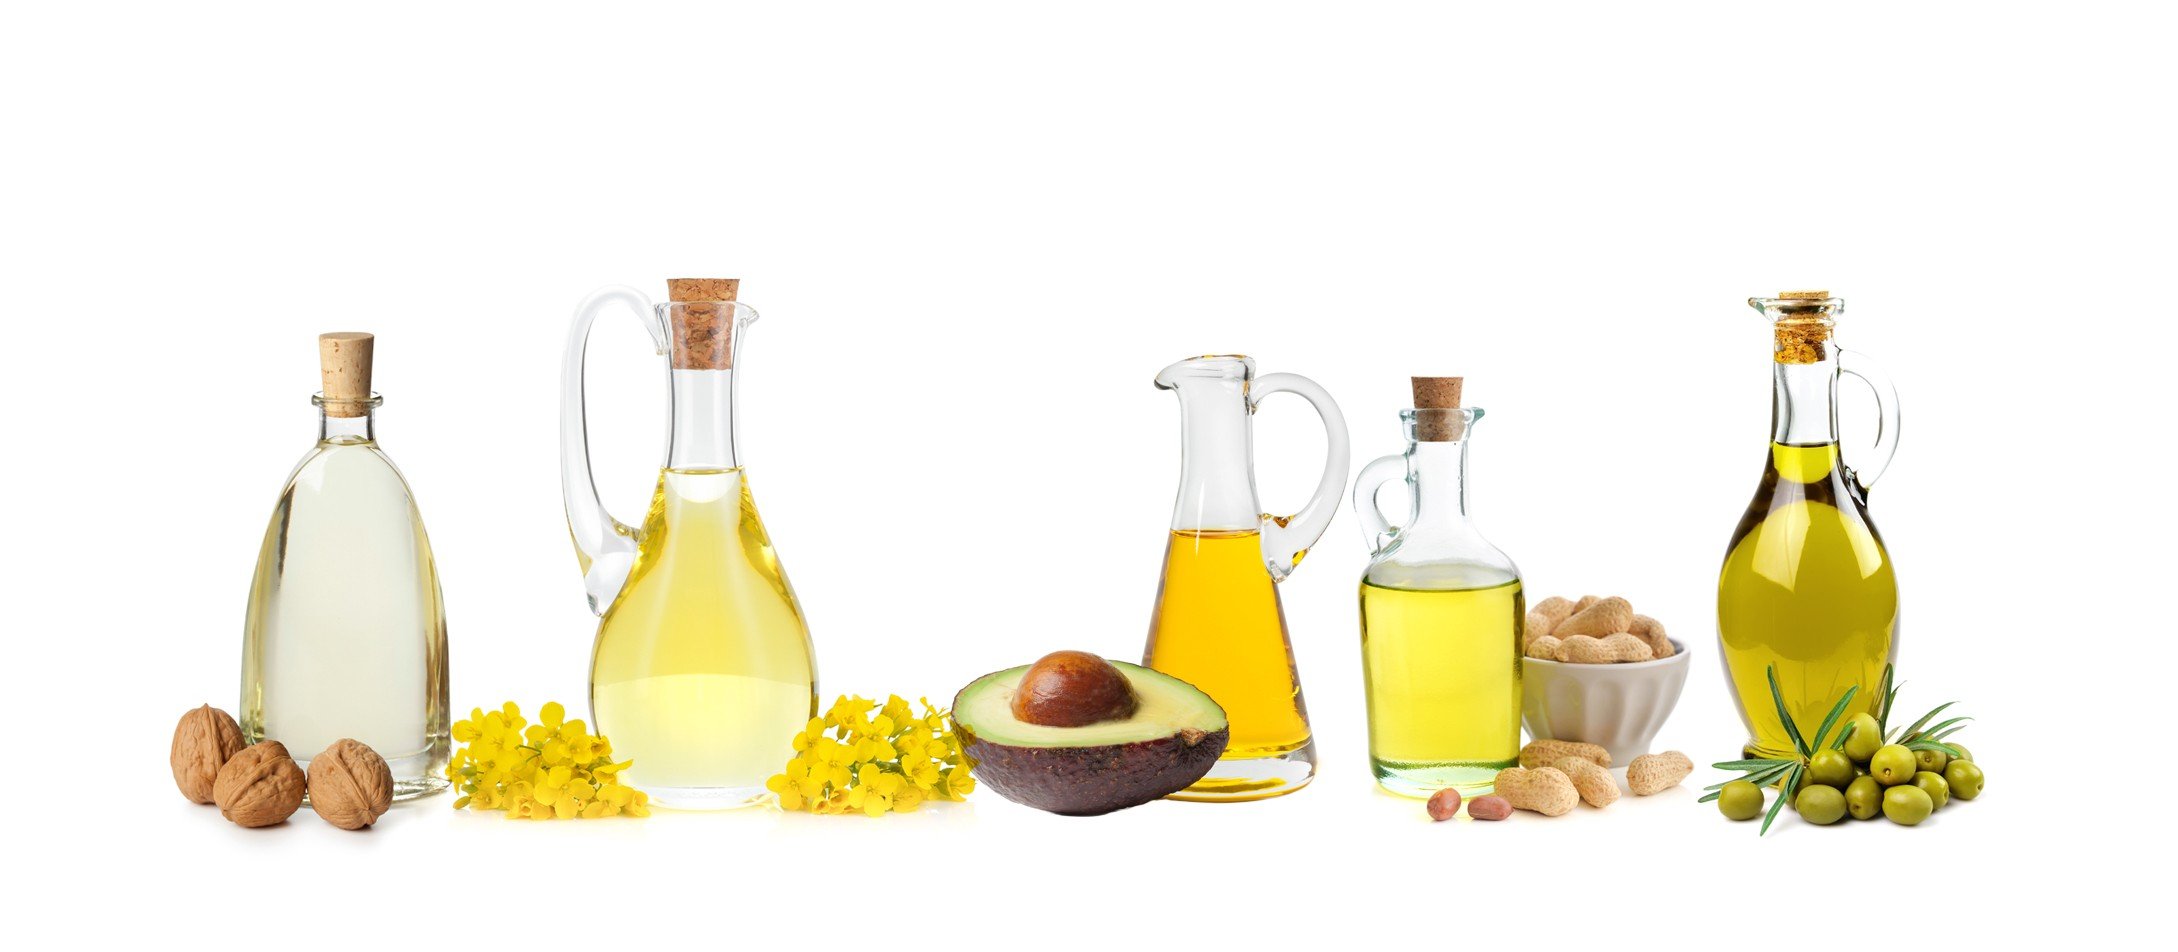 Cooking oils such as (from left) walnut, canola, avocado, peanut and olive contain all kinds of beneficial essential vitamins and acids. Photo: Alamy